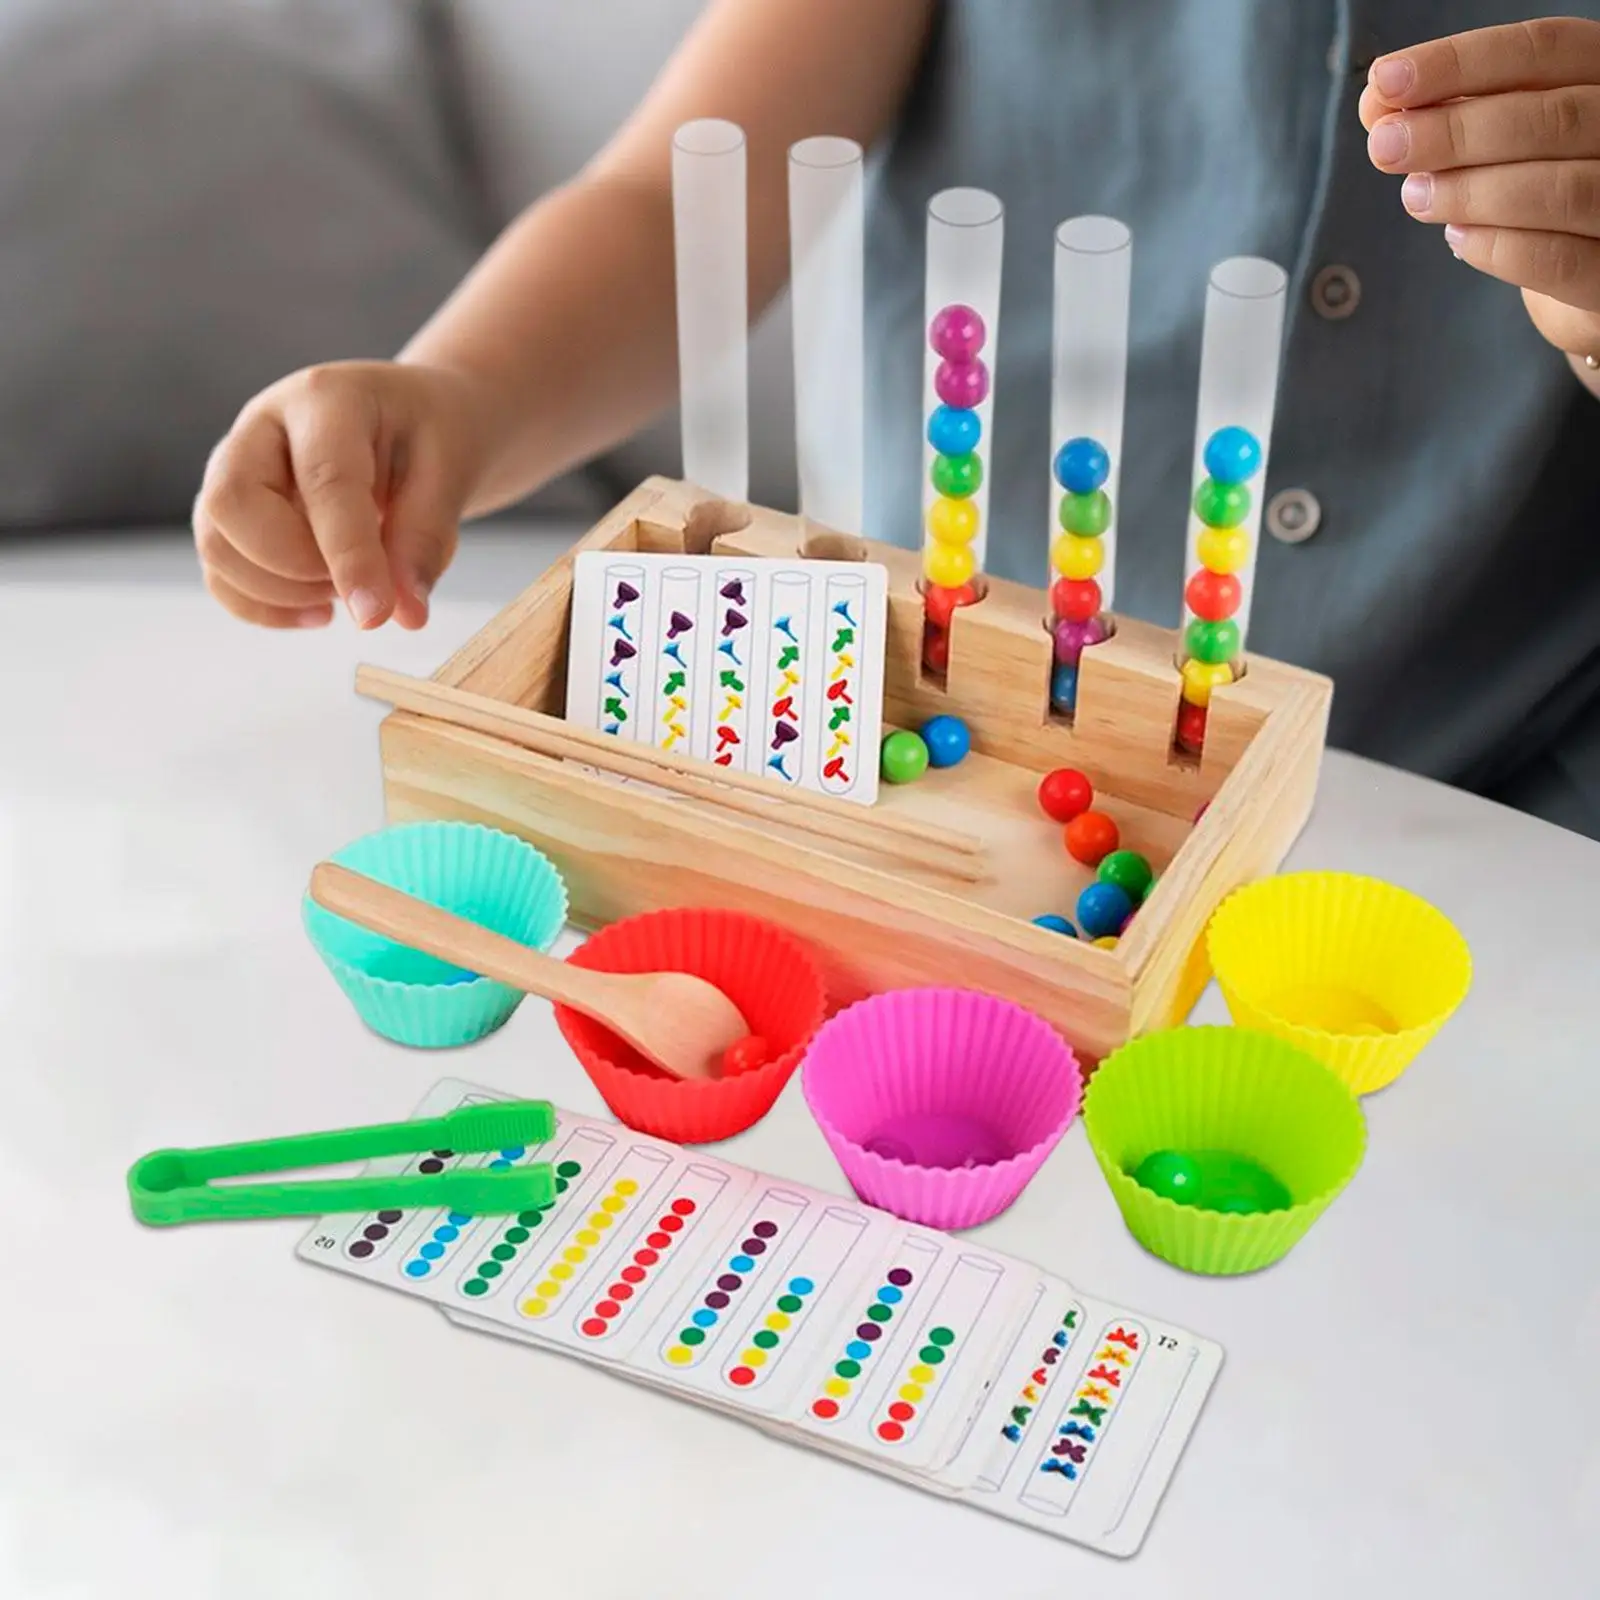 Wooden Rainbow Balls in Cups Early Education Toys Preschool Sensory Toys Clip Bead Game Wooden Peg Board Game for Kids Toddler